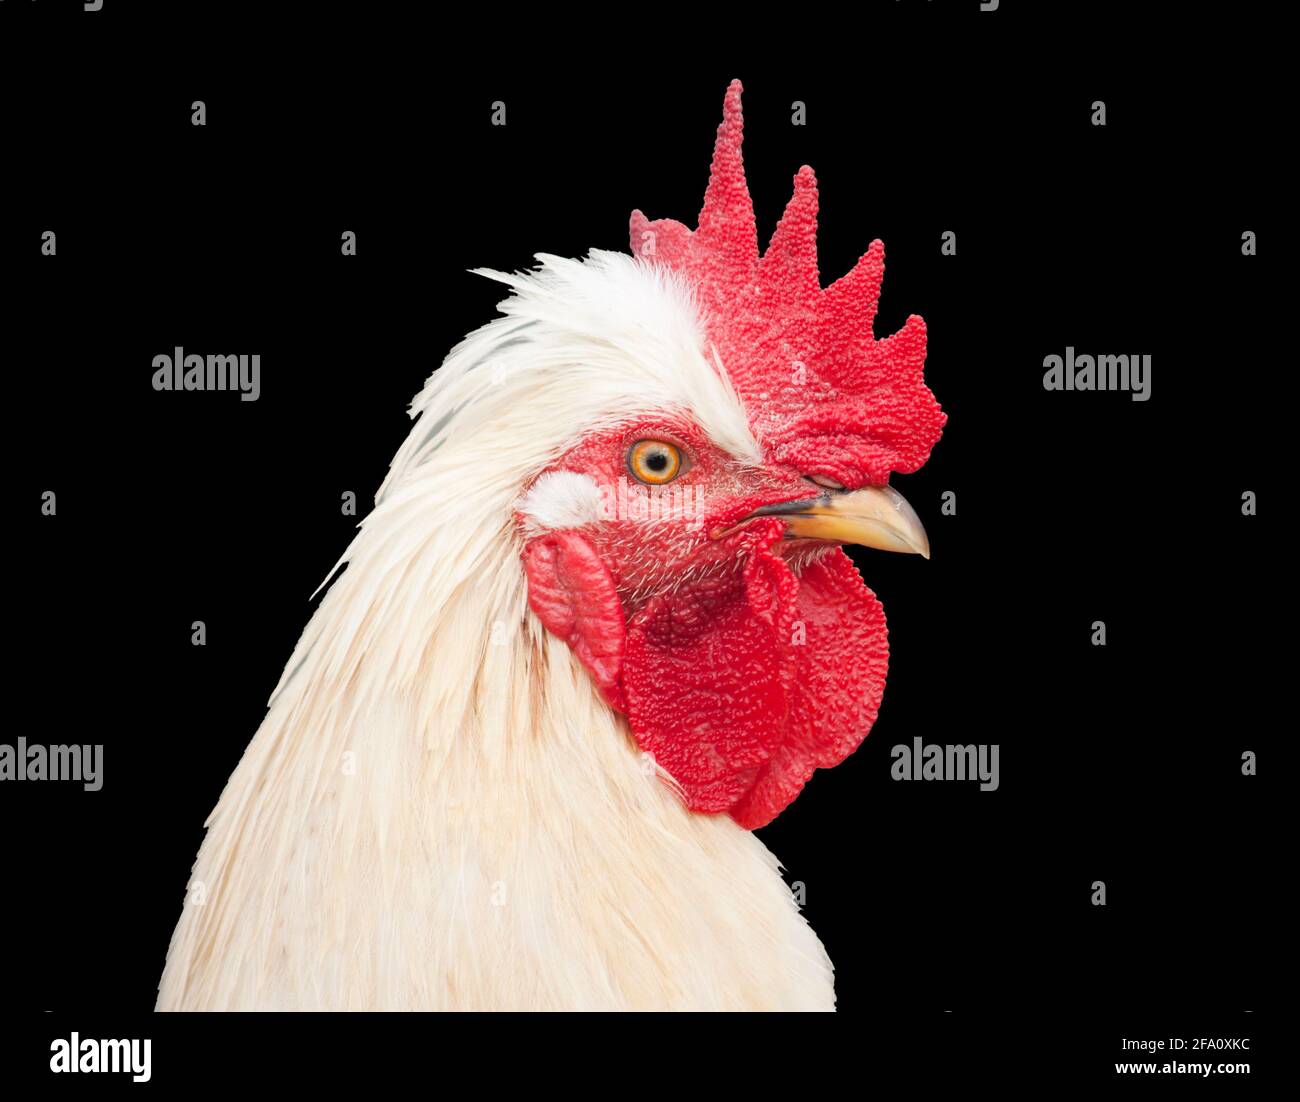 White rooster against black background Stock Photo